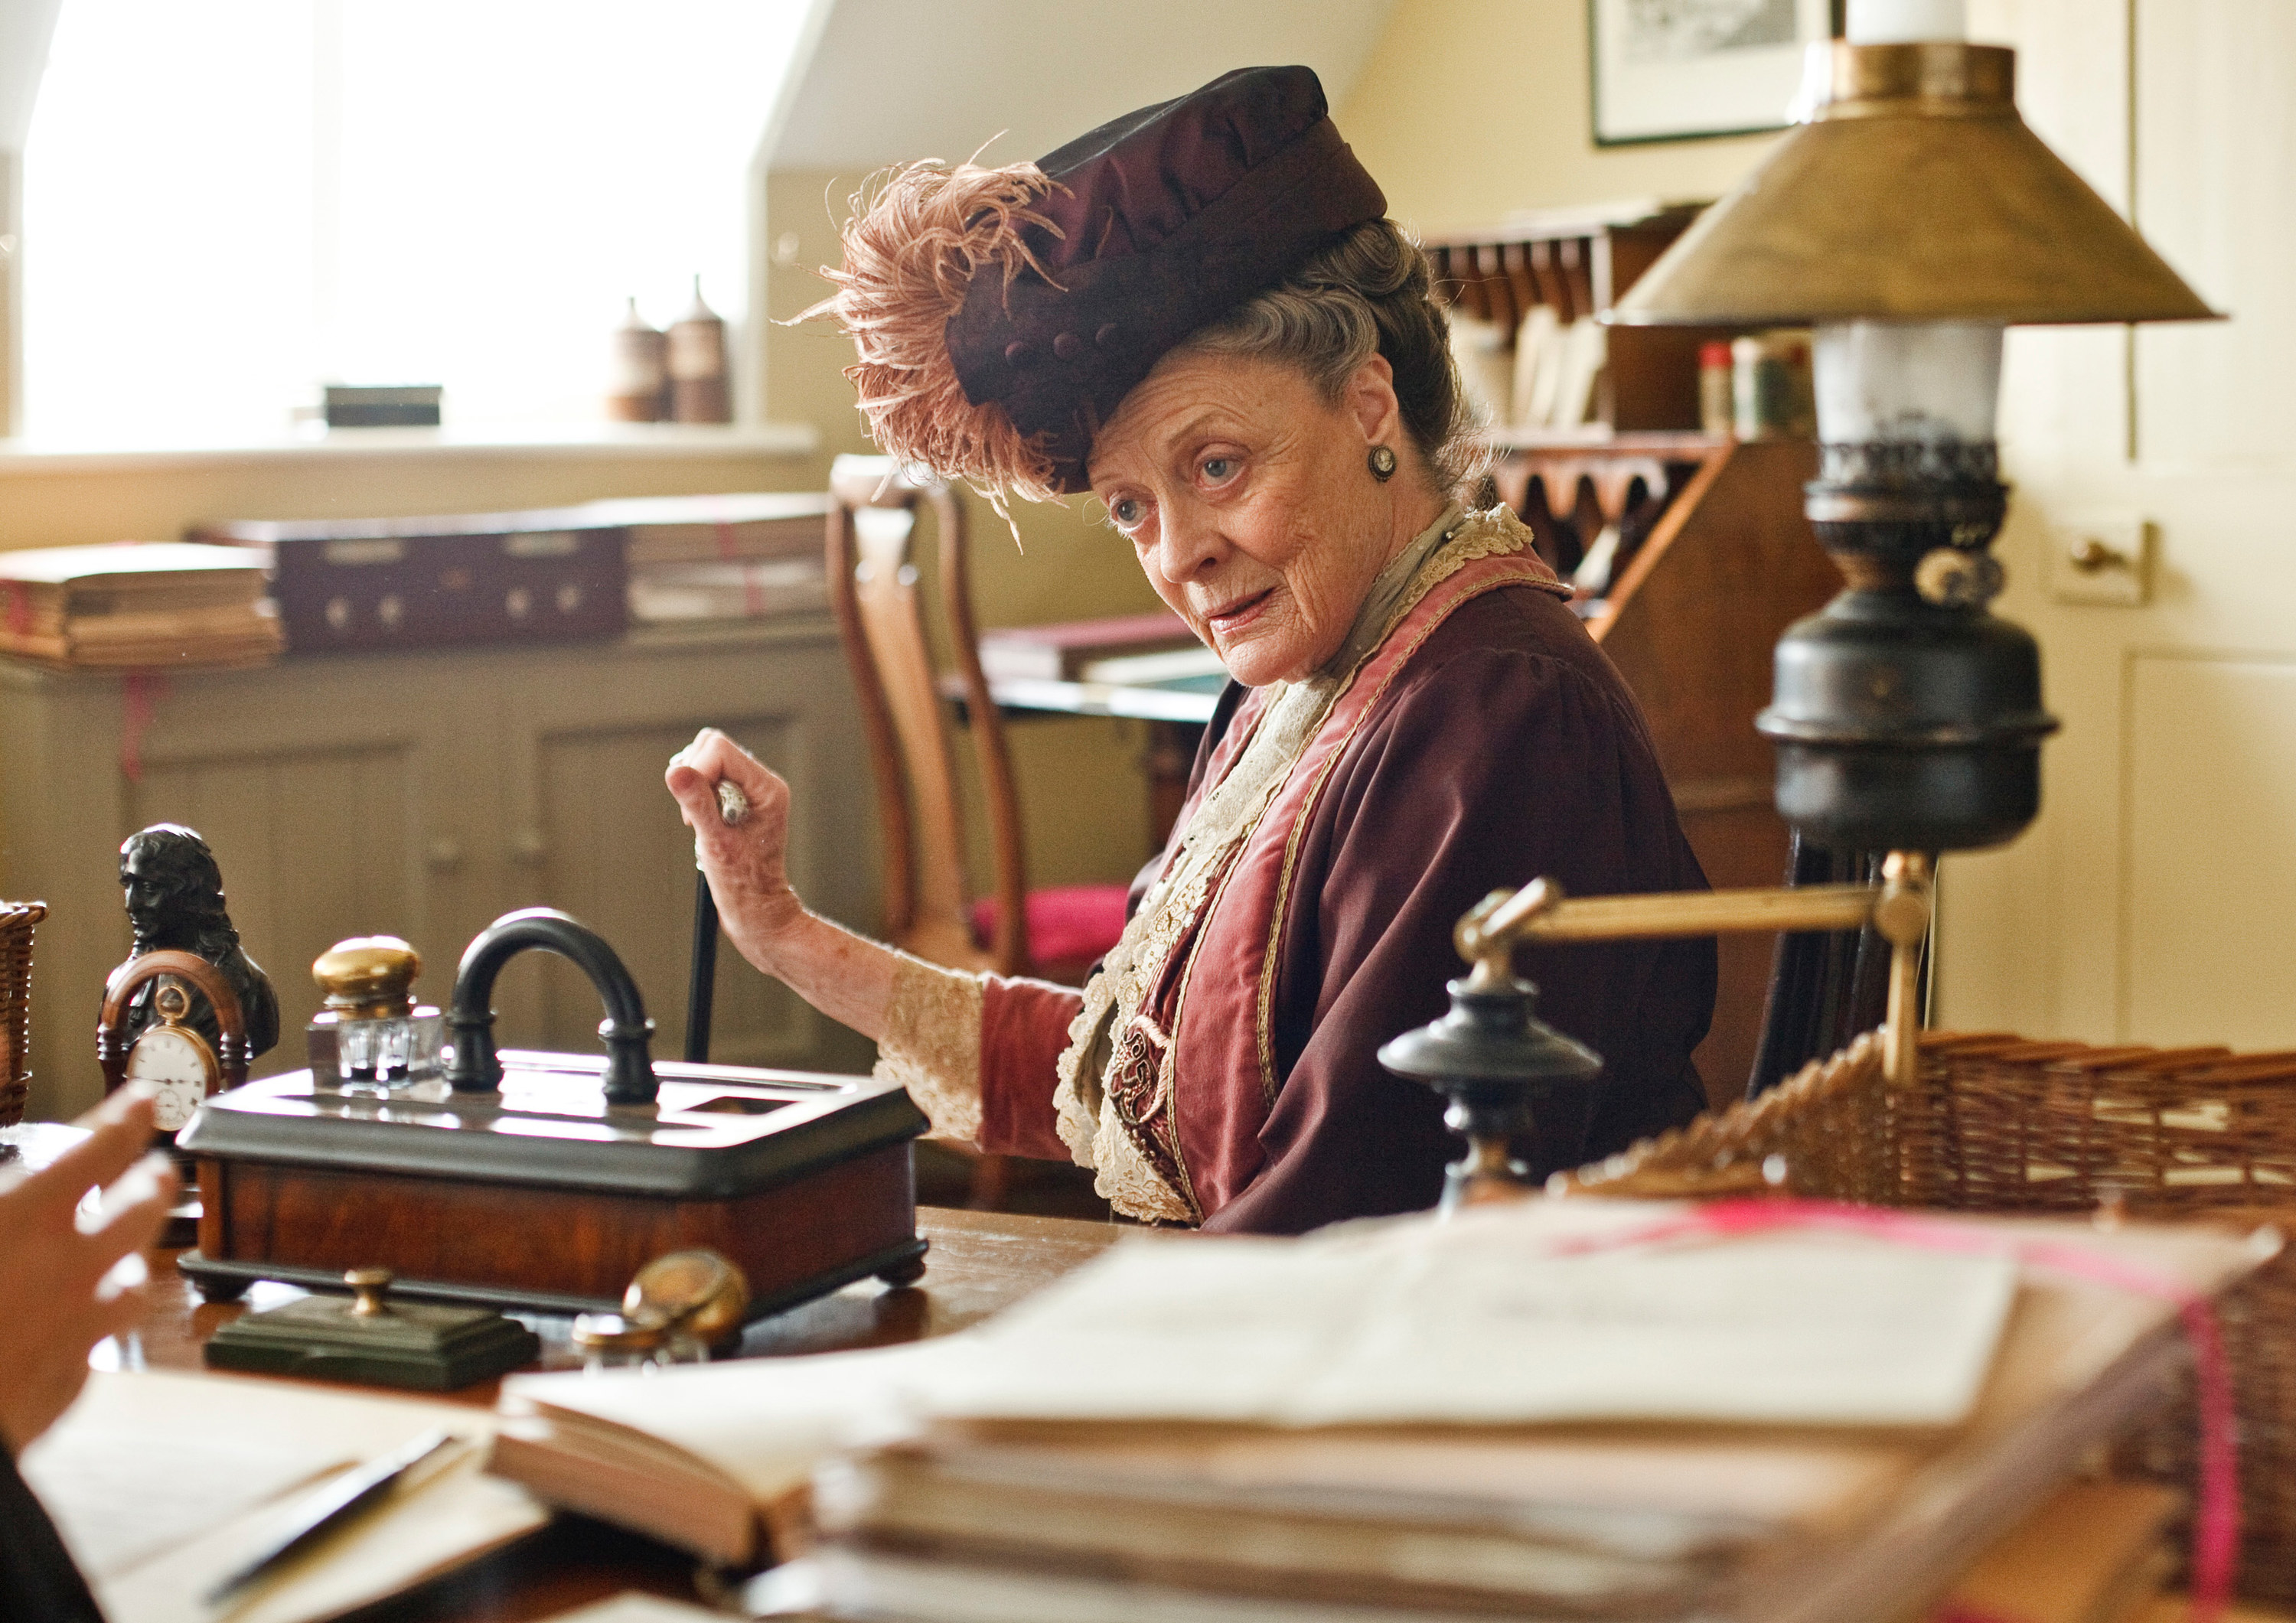 Smith as the countess in an office